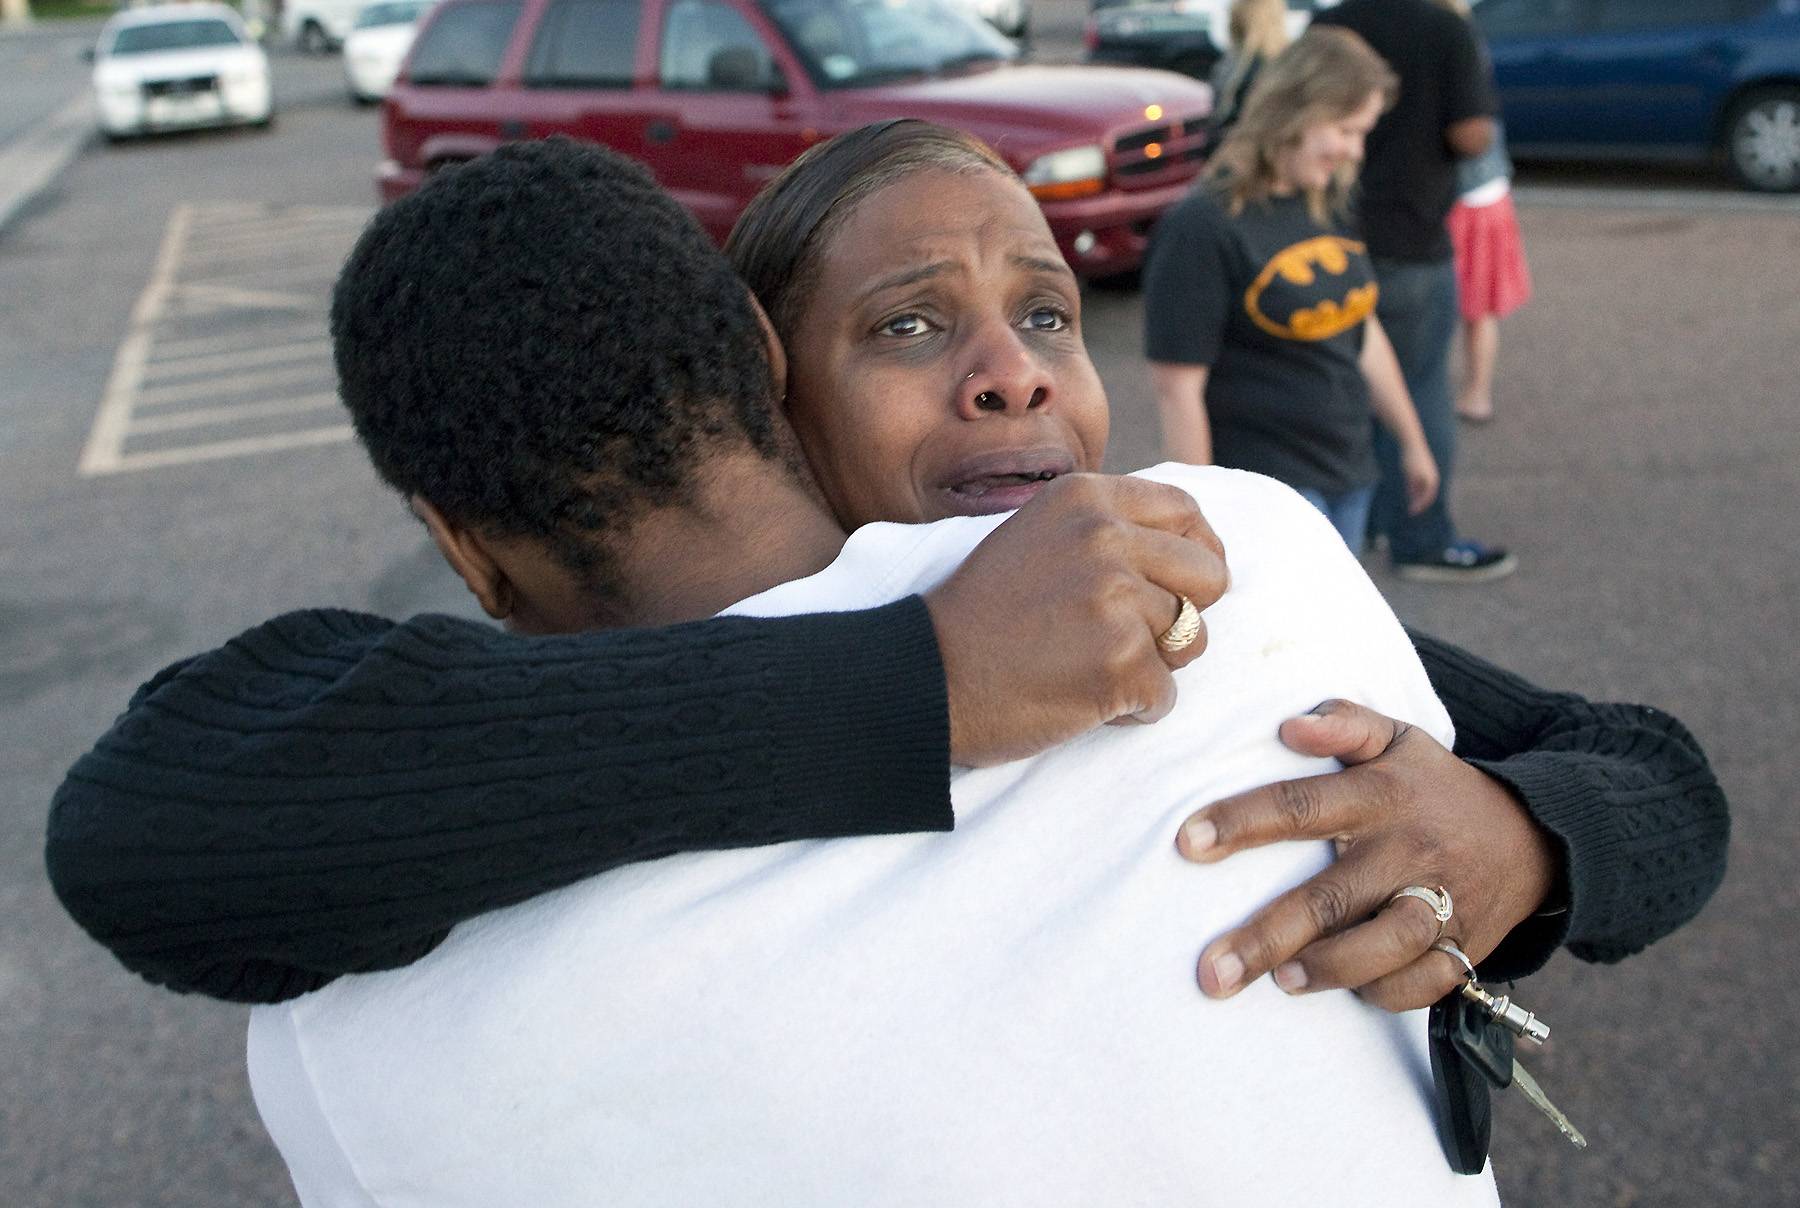 Shamecca Davis hugs her son Isaiah Bow, who was an eye witness to the shooting, outside Gateway High School where witness were brought for questioning Friday, July 20, 2012 in Denver.  After leaving the theater Bow went back in to find his girlfriend. " I didn't want to leave her in there. But she's ok now," Bow said.   A gunman wearing a gas mask set off an unknown gas and fired into a crowded movie theater at a midnight opening of the Batman movie "The Dark Knight Rises," killing at least 12 people and injuring at least 50 others, authorities said. (AP Photo/Barry Gutierrez)